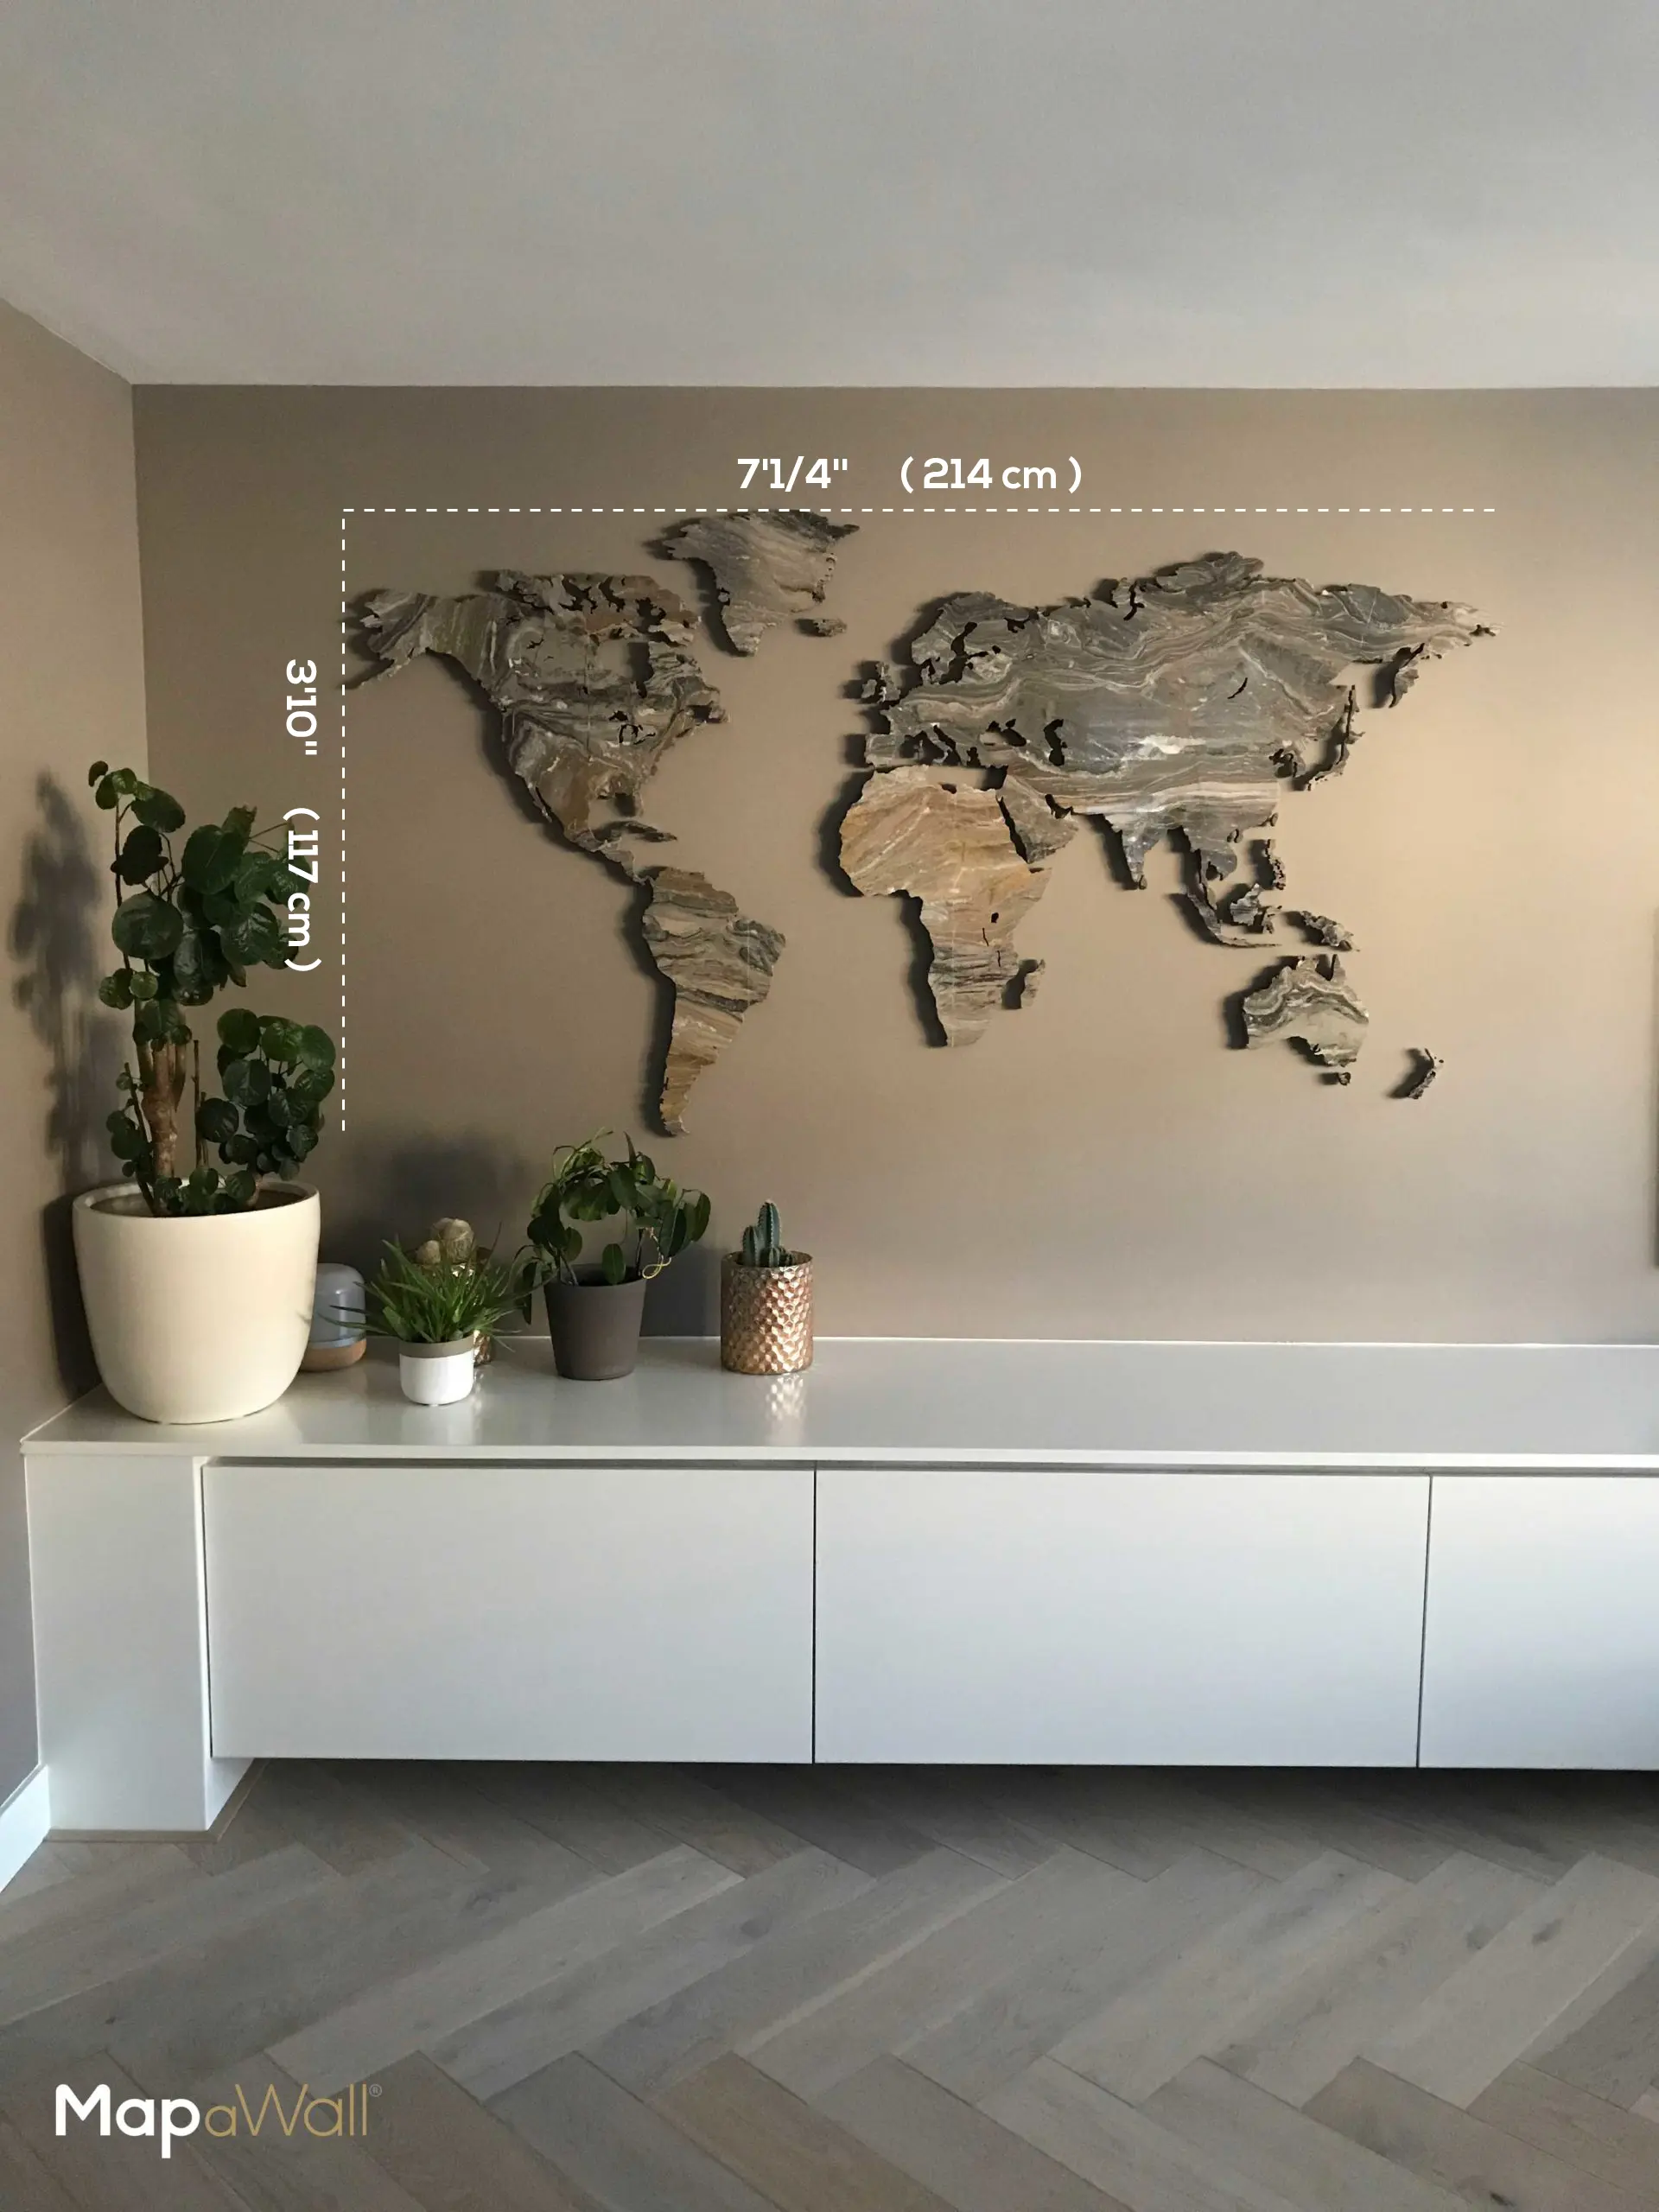 MapaWall stone world map in client's interior